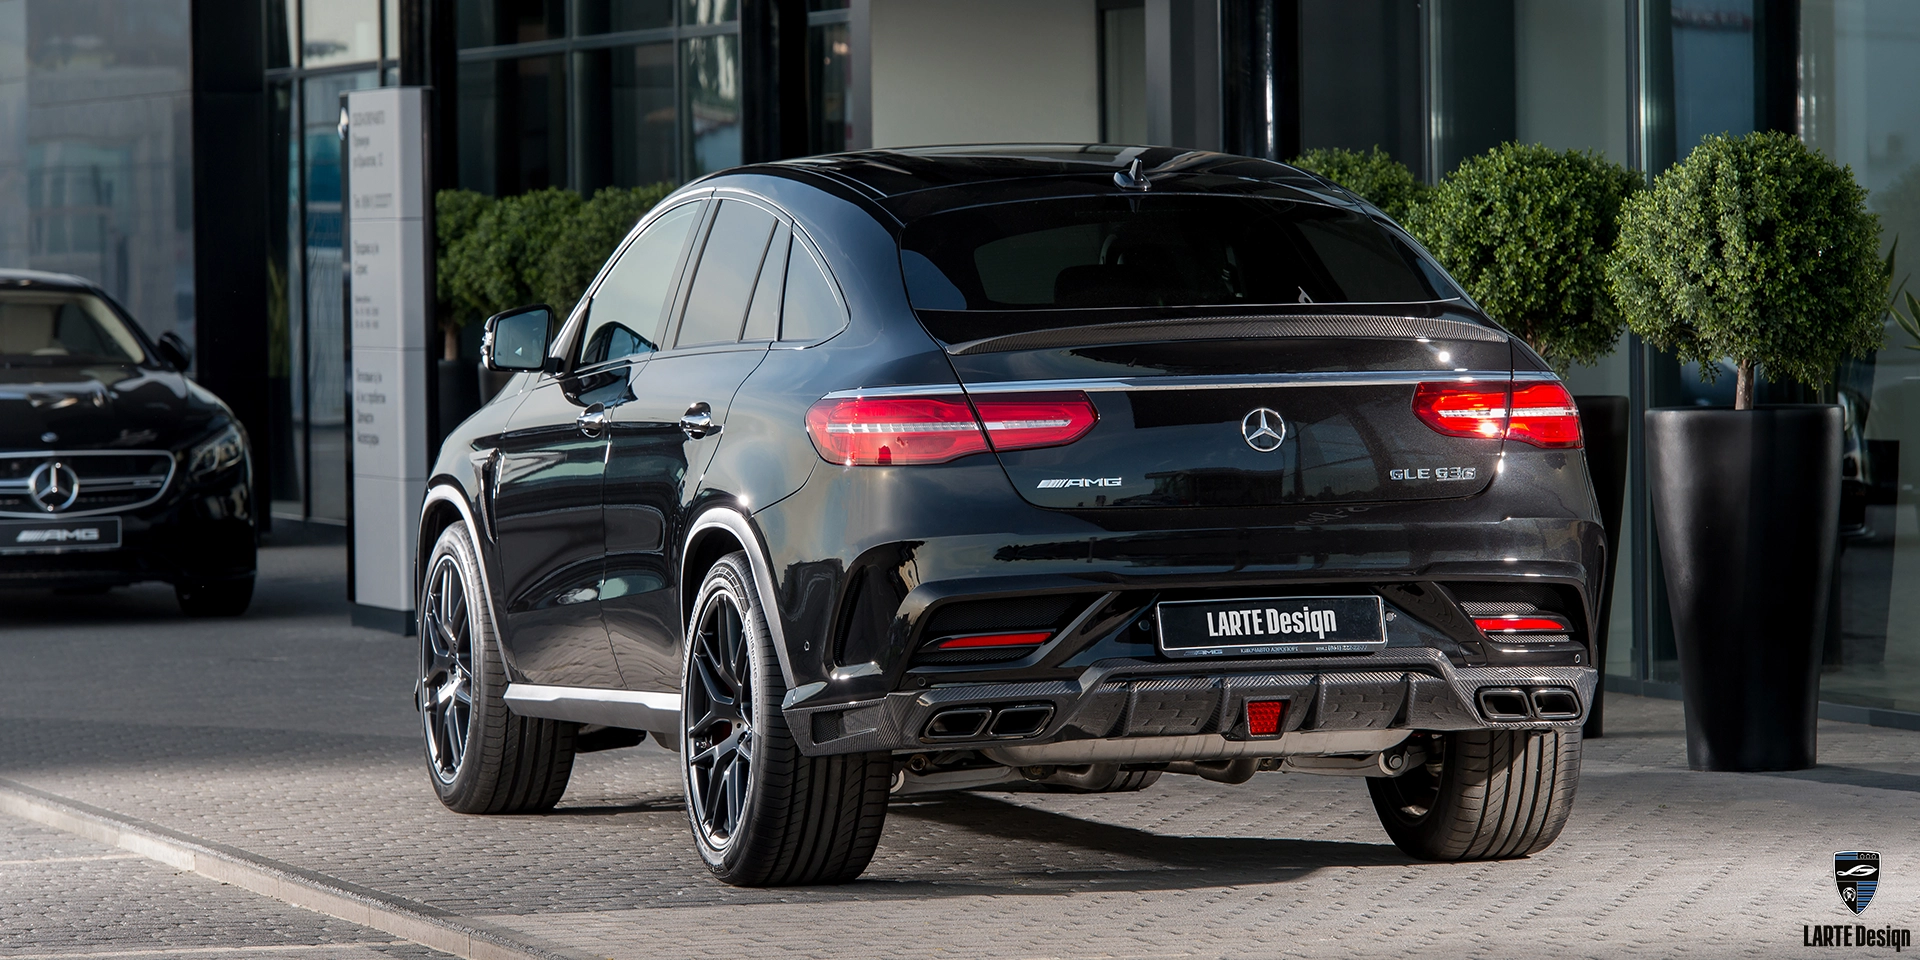 Order new carbon fiber exhaust tips for Mercedes Benz GLE Coupe C292 Obsidian Black metallic